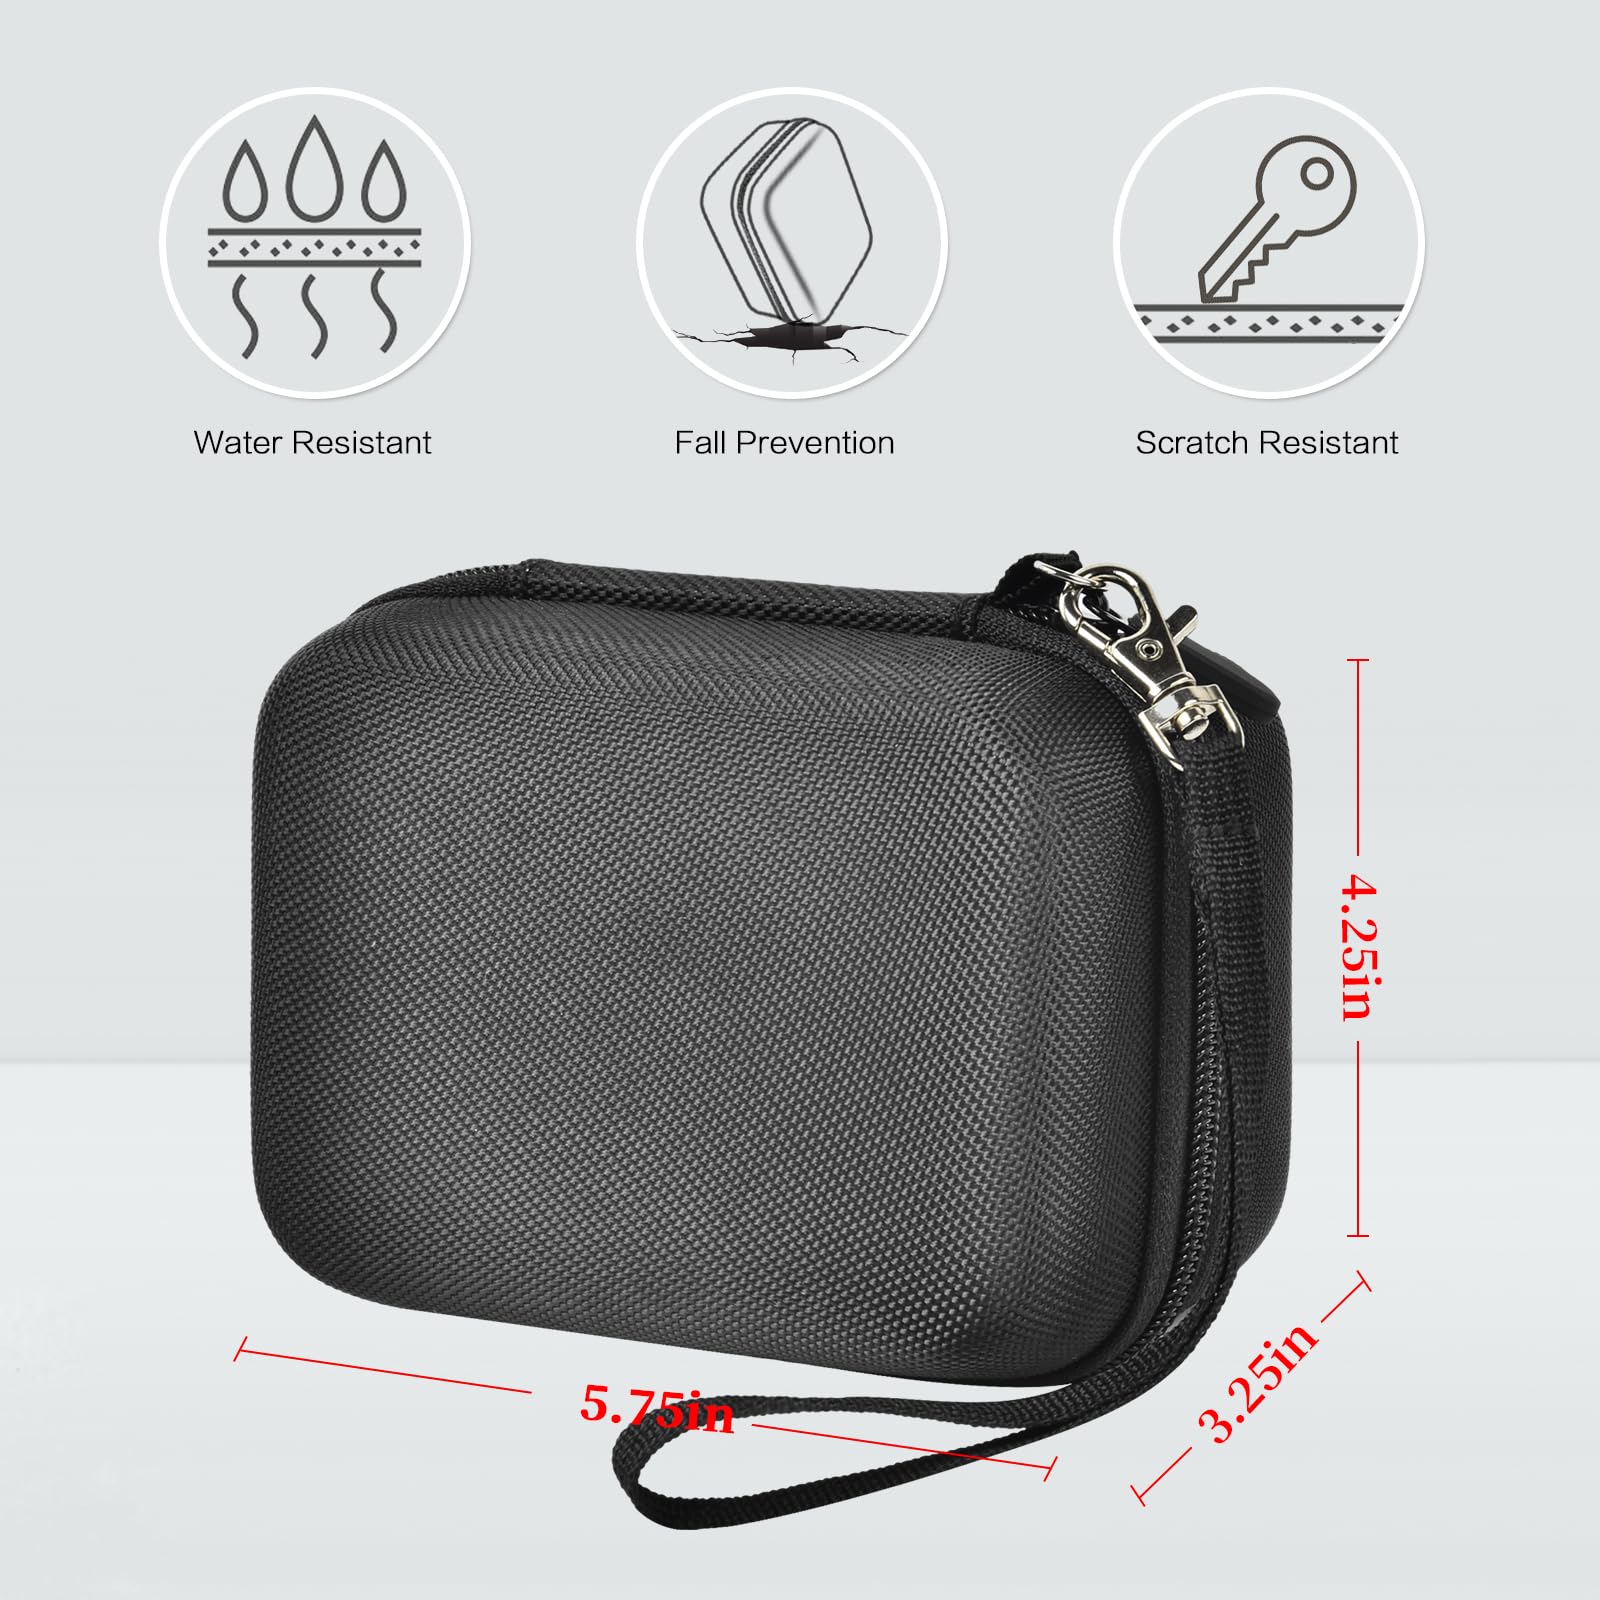 Againmore Hard Case Compatible with Hauyince/for ToAuite/for Lecnippy/for Bifevsr/for Lecran/for Saneen 4K 5K Digital Camera 48MP, Portable Camera Storage Cover-Black Bag+Black Zipper(Box Only)